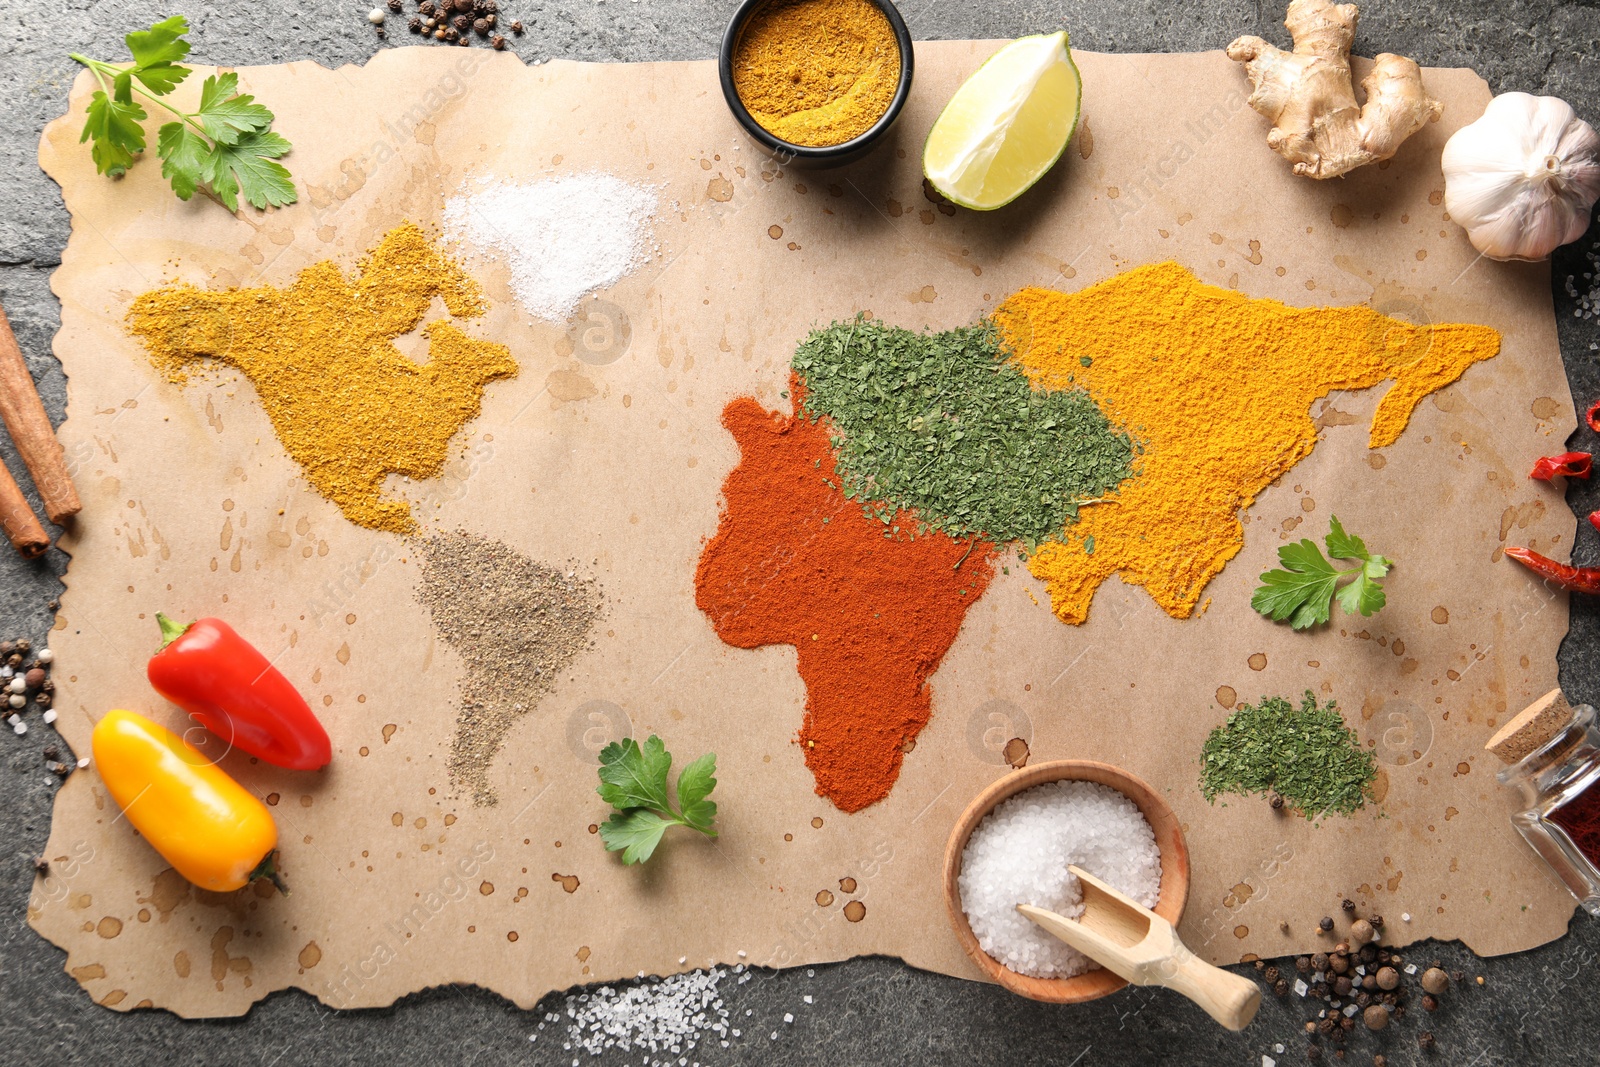 Photo of World map of different spices and products on grey table, top view